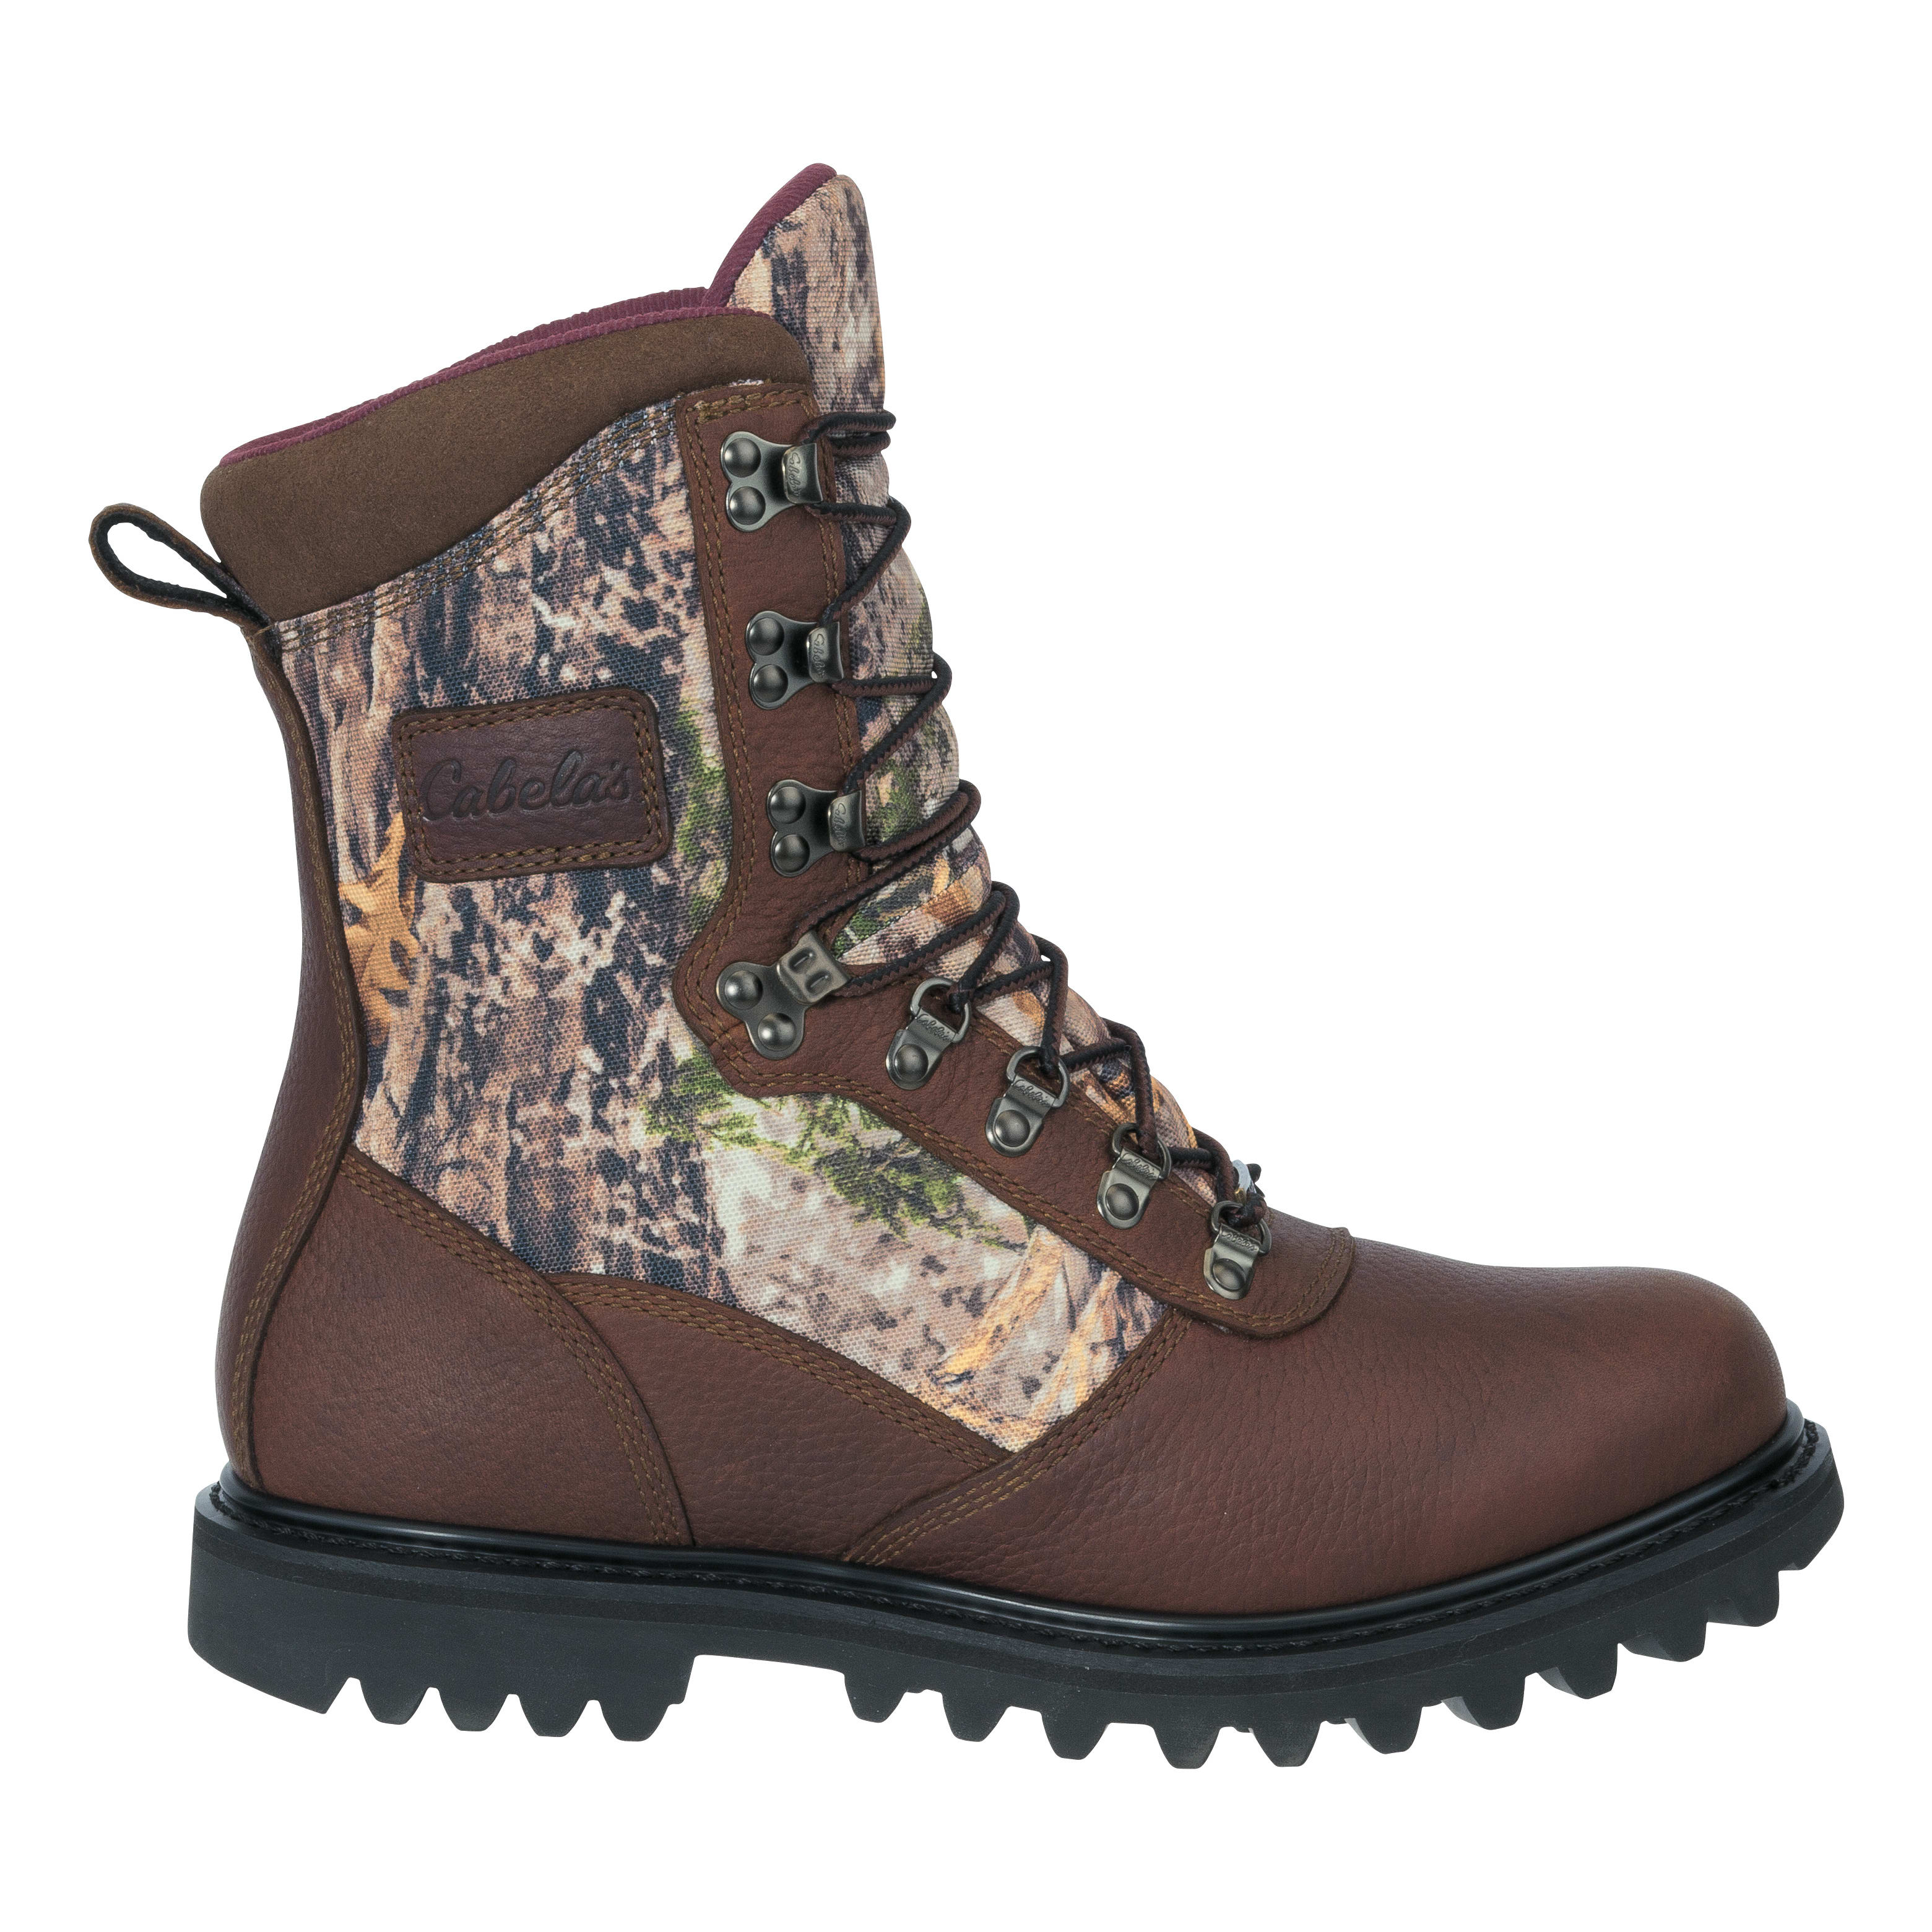 Cabela's Iron Ridge™ Uninsulated Hunting Boots with GORE-TEX® - side